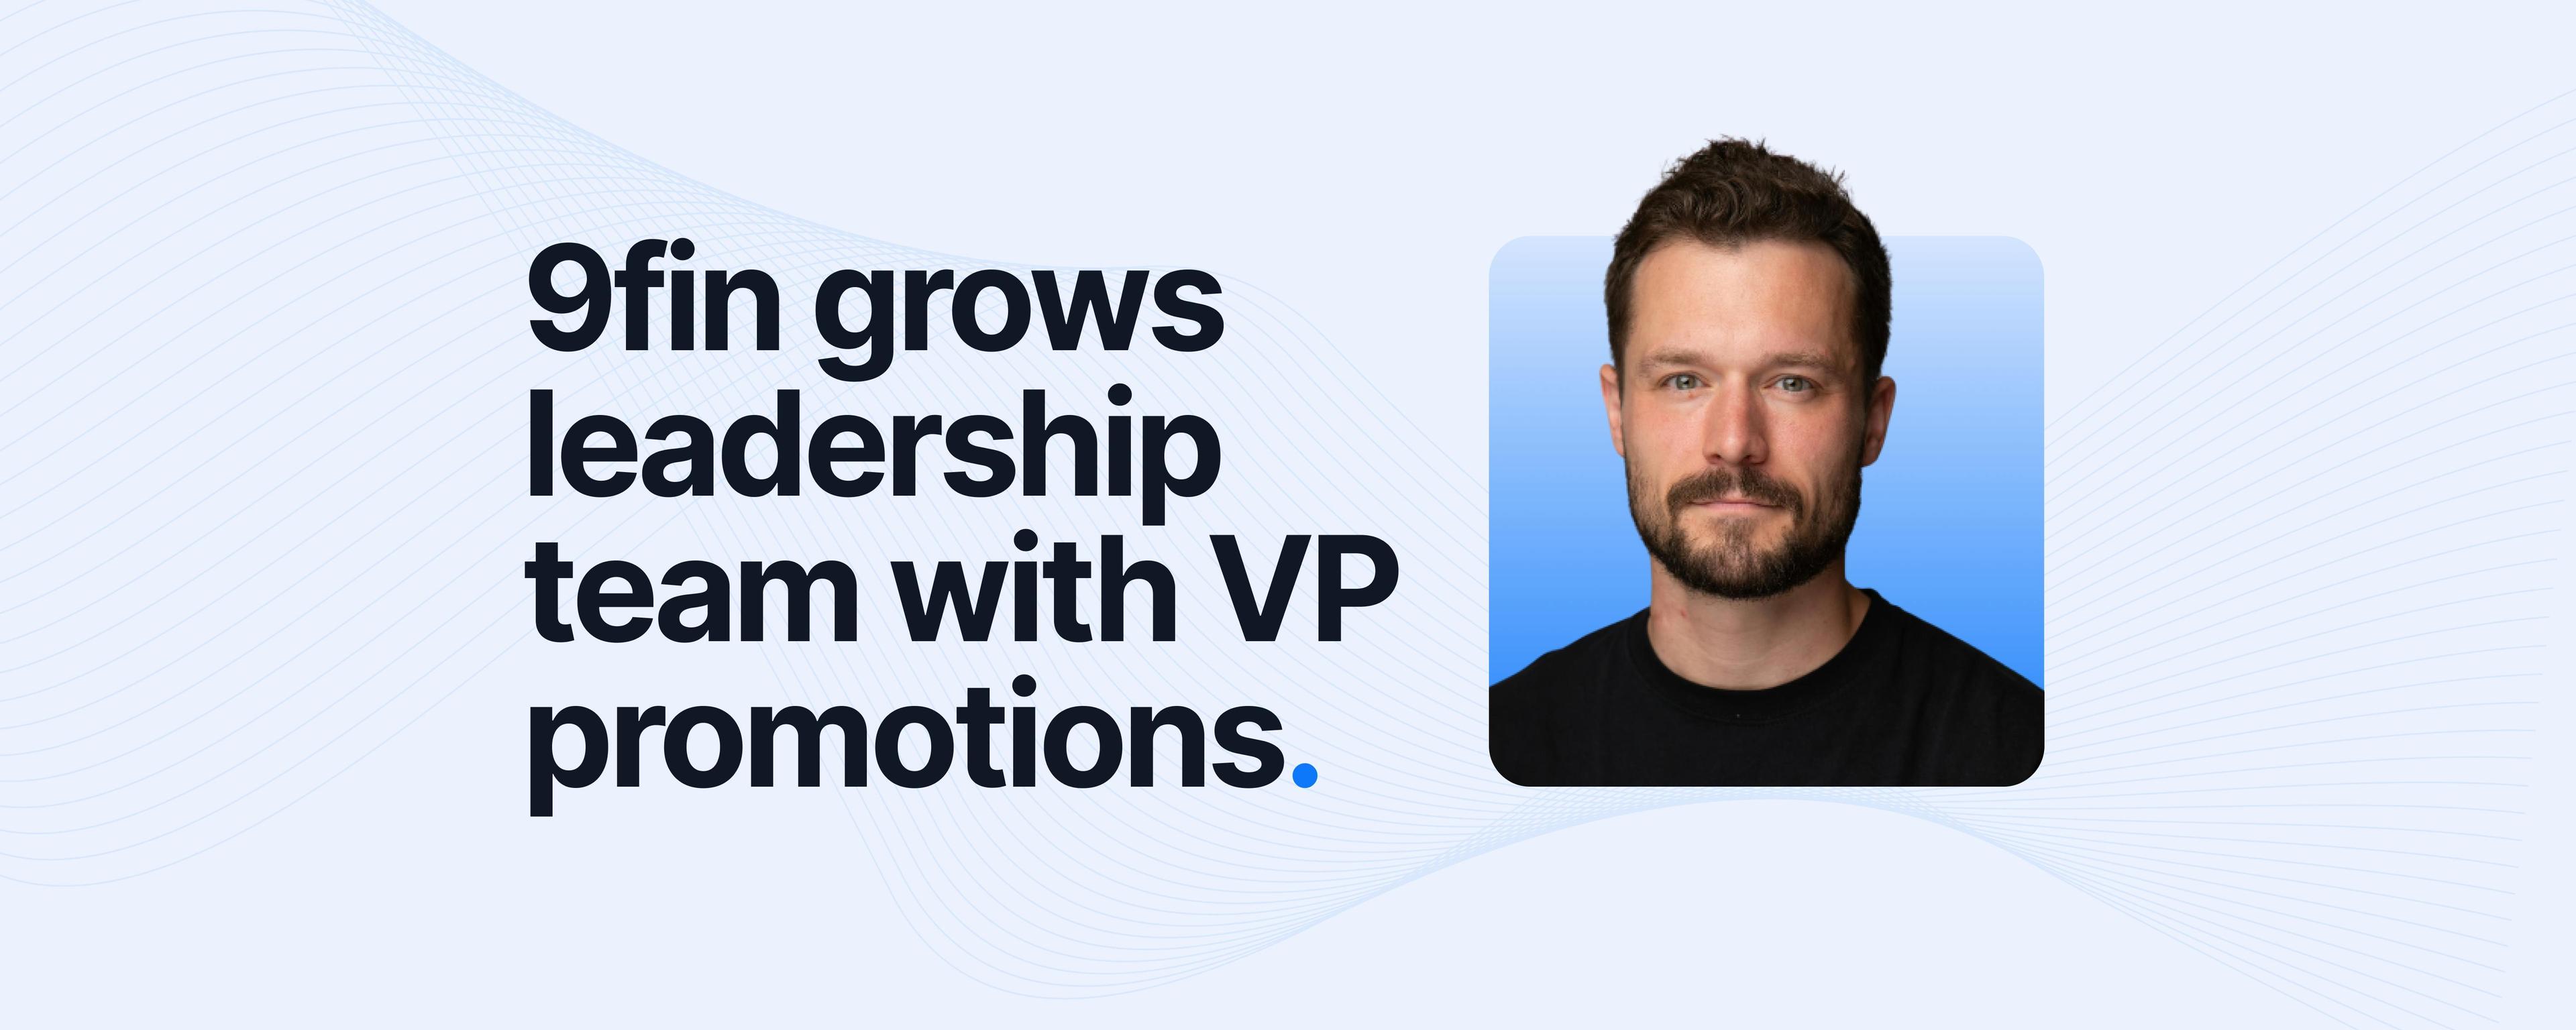 9fin grows leadership team with VP Content promotion